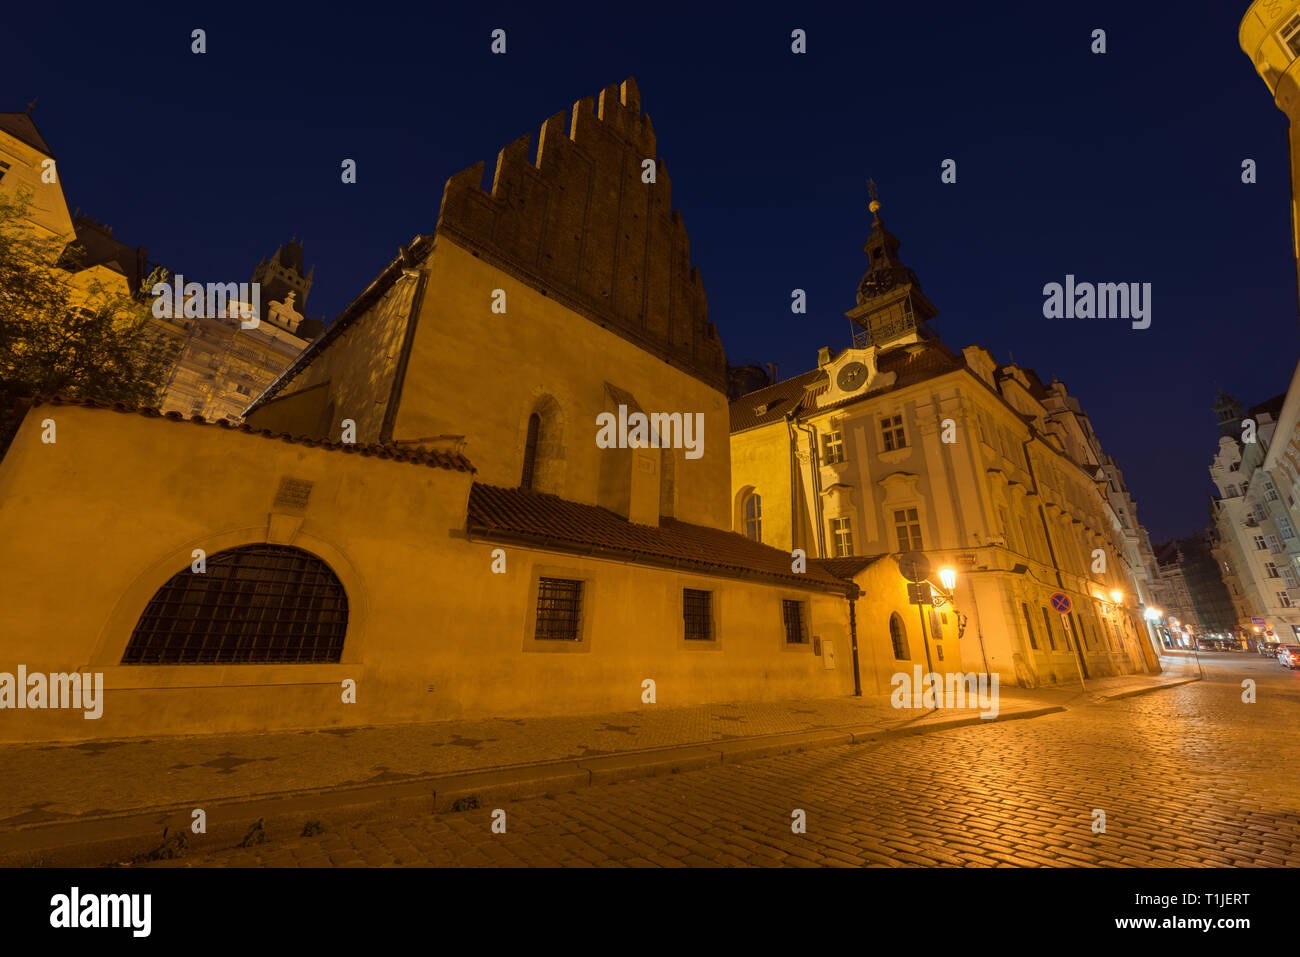 Two synagogues in Prague: Old New Synagogue and High Synagogue Stock Photo